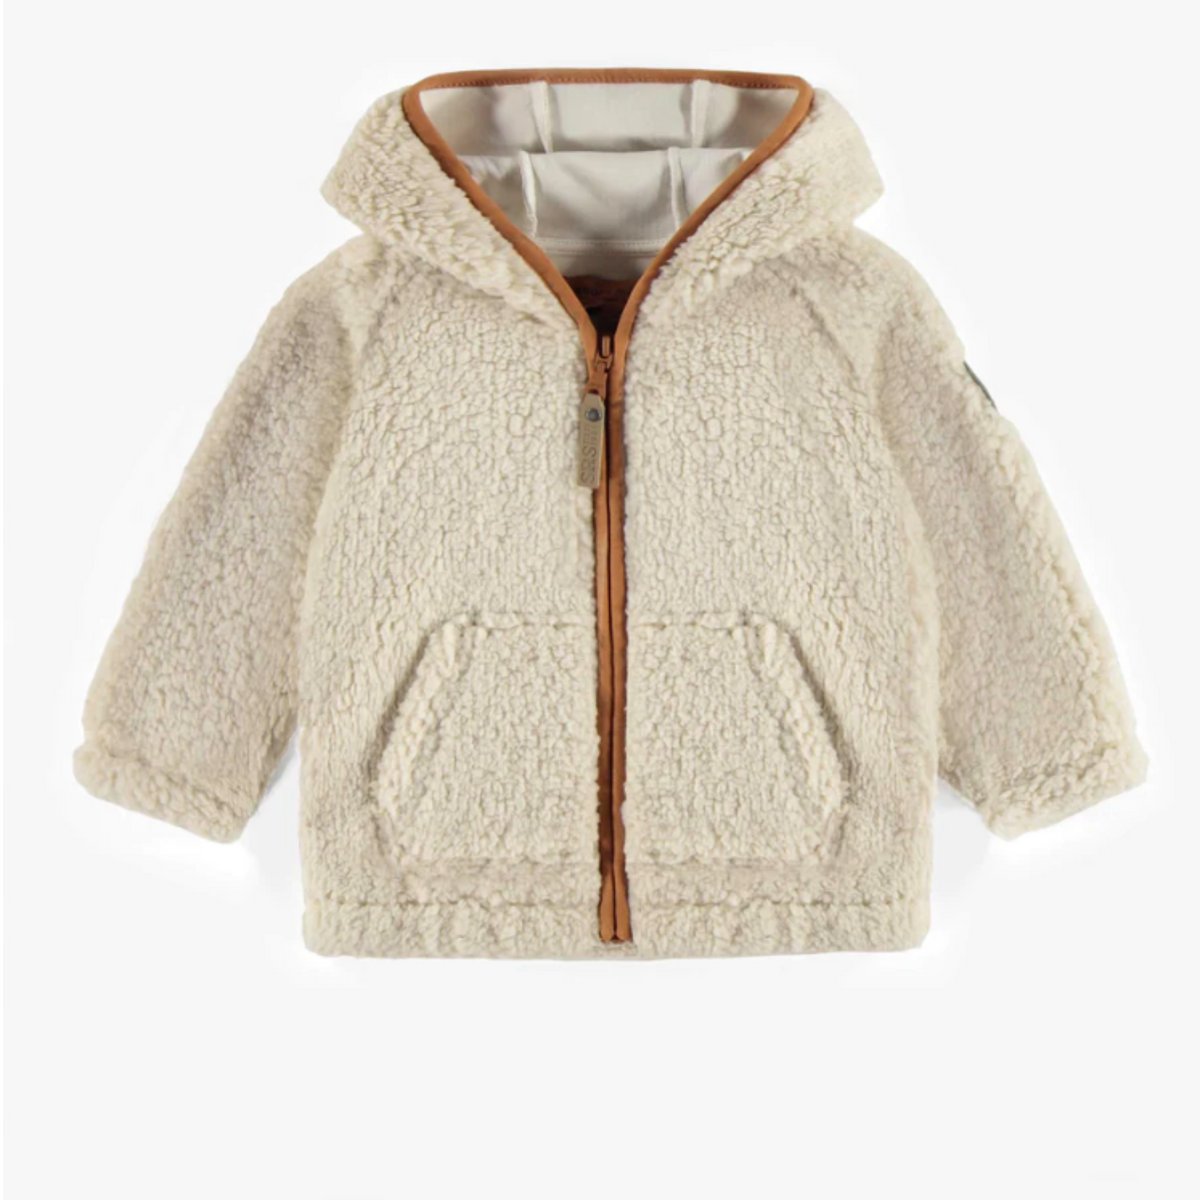 Ivory Sherpa Jacket with Hood, Toddler